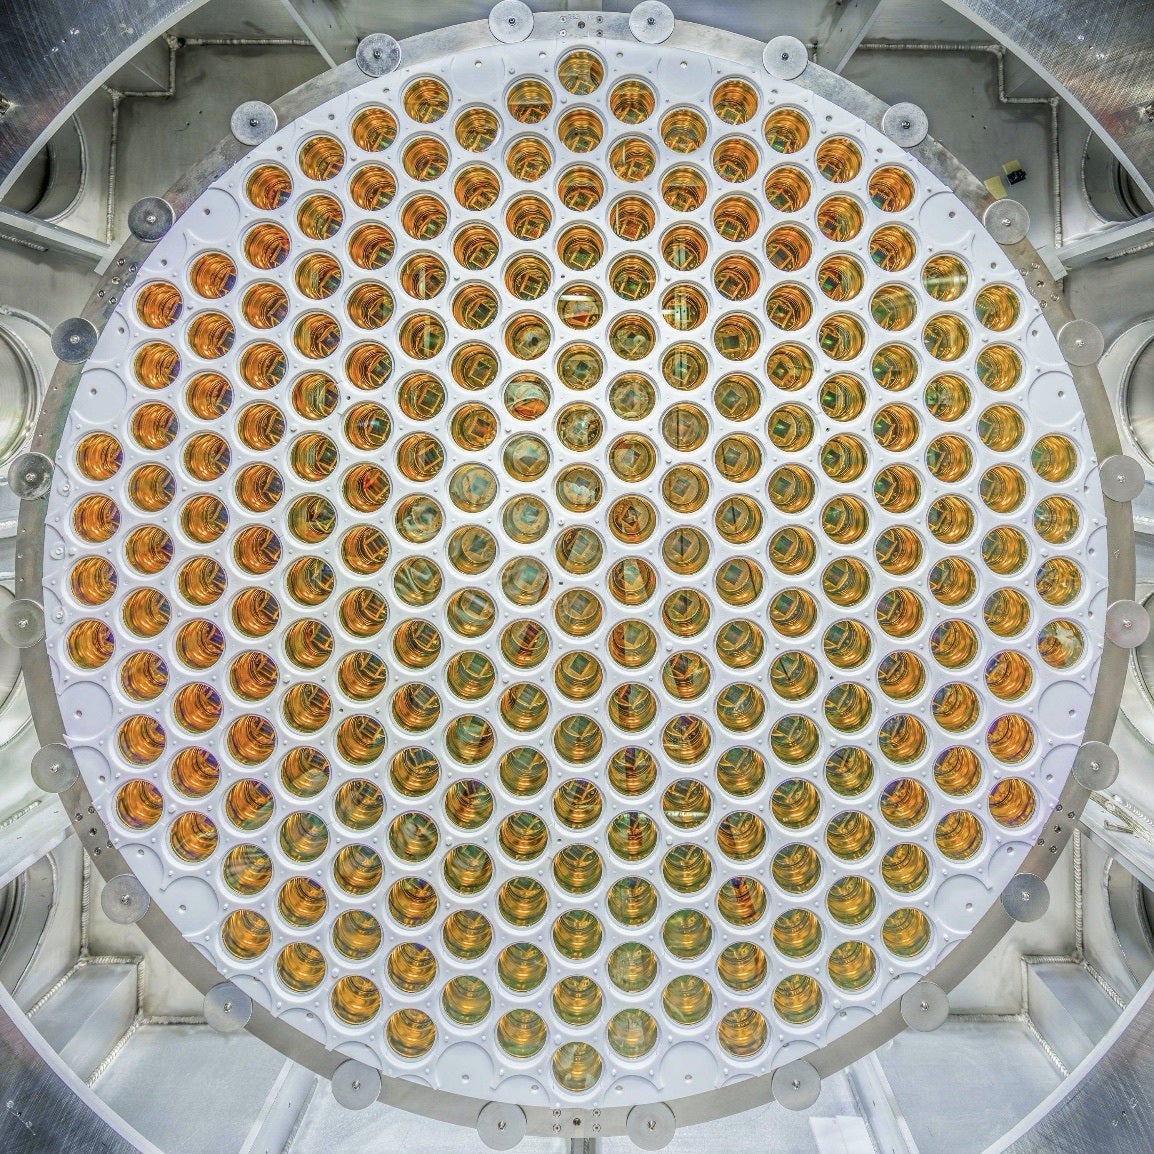 LZ Dark Matter detector with gold photomultipliers to depict what is matter